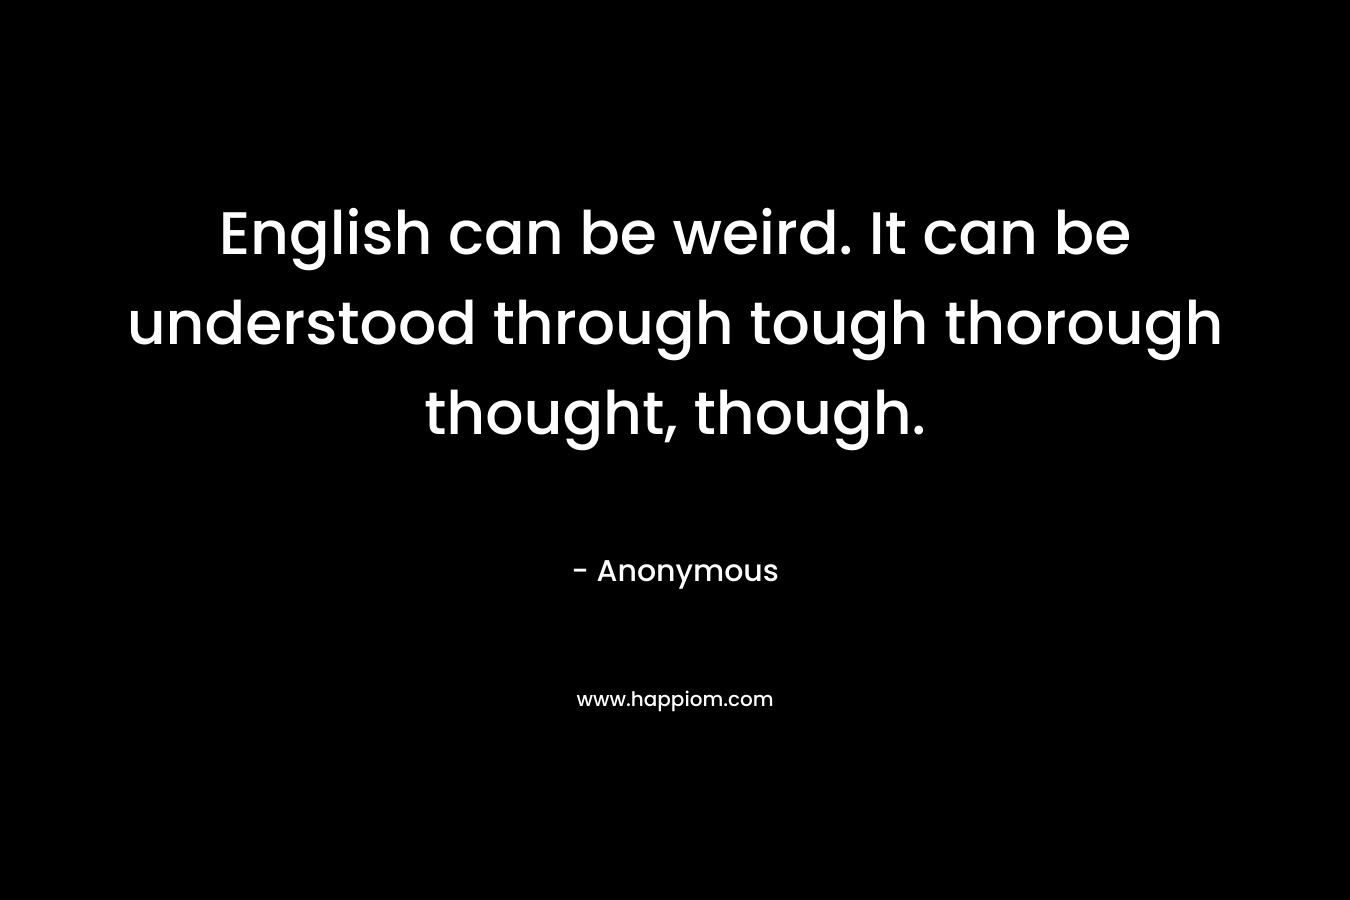 English can be weird. It can be understood through tough thorough thought, though.